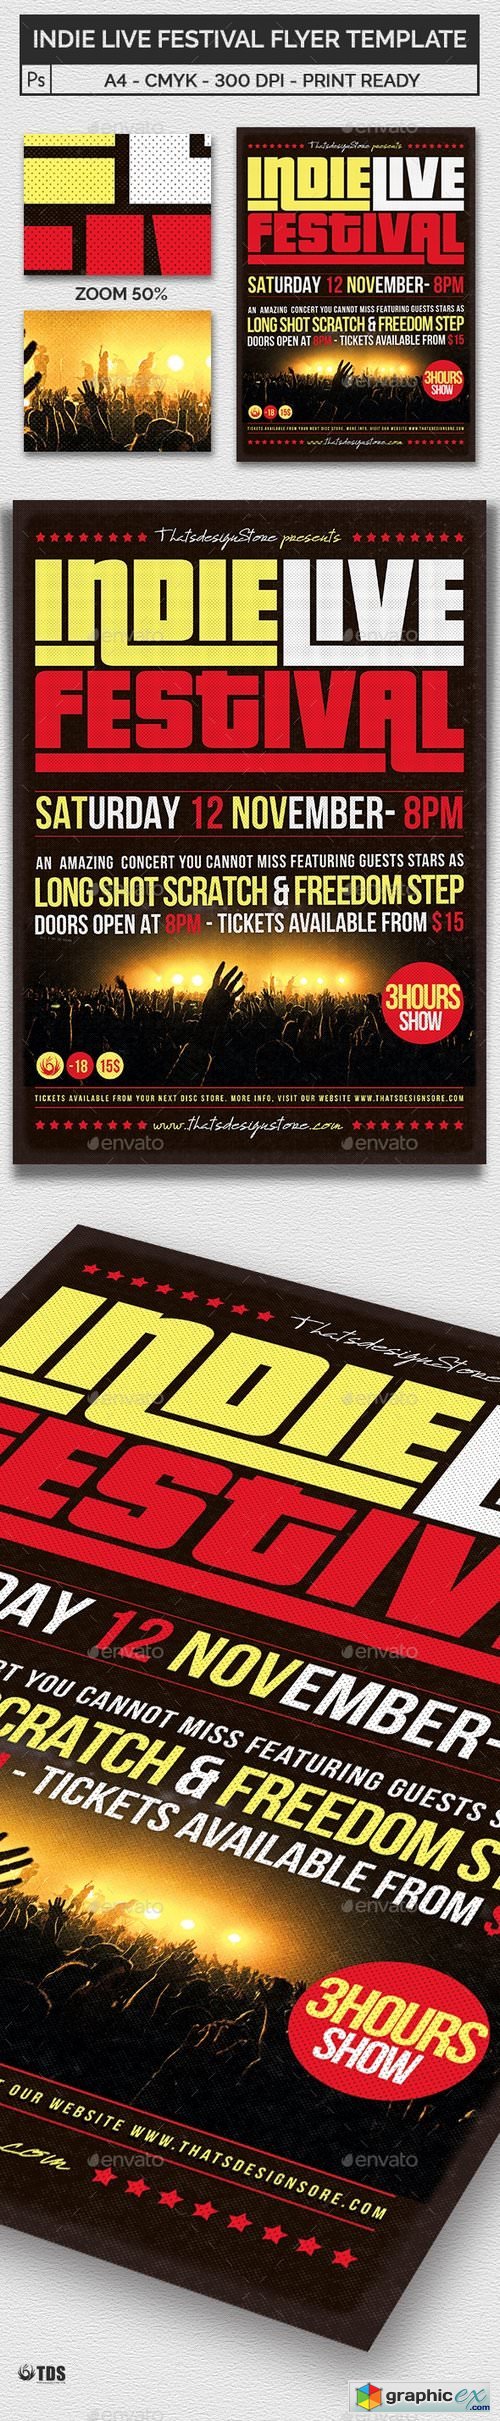 Indie Live Festival Flyer Template